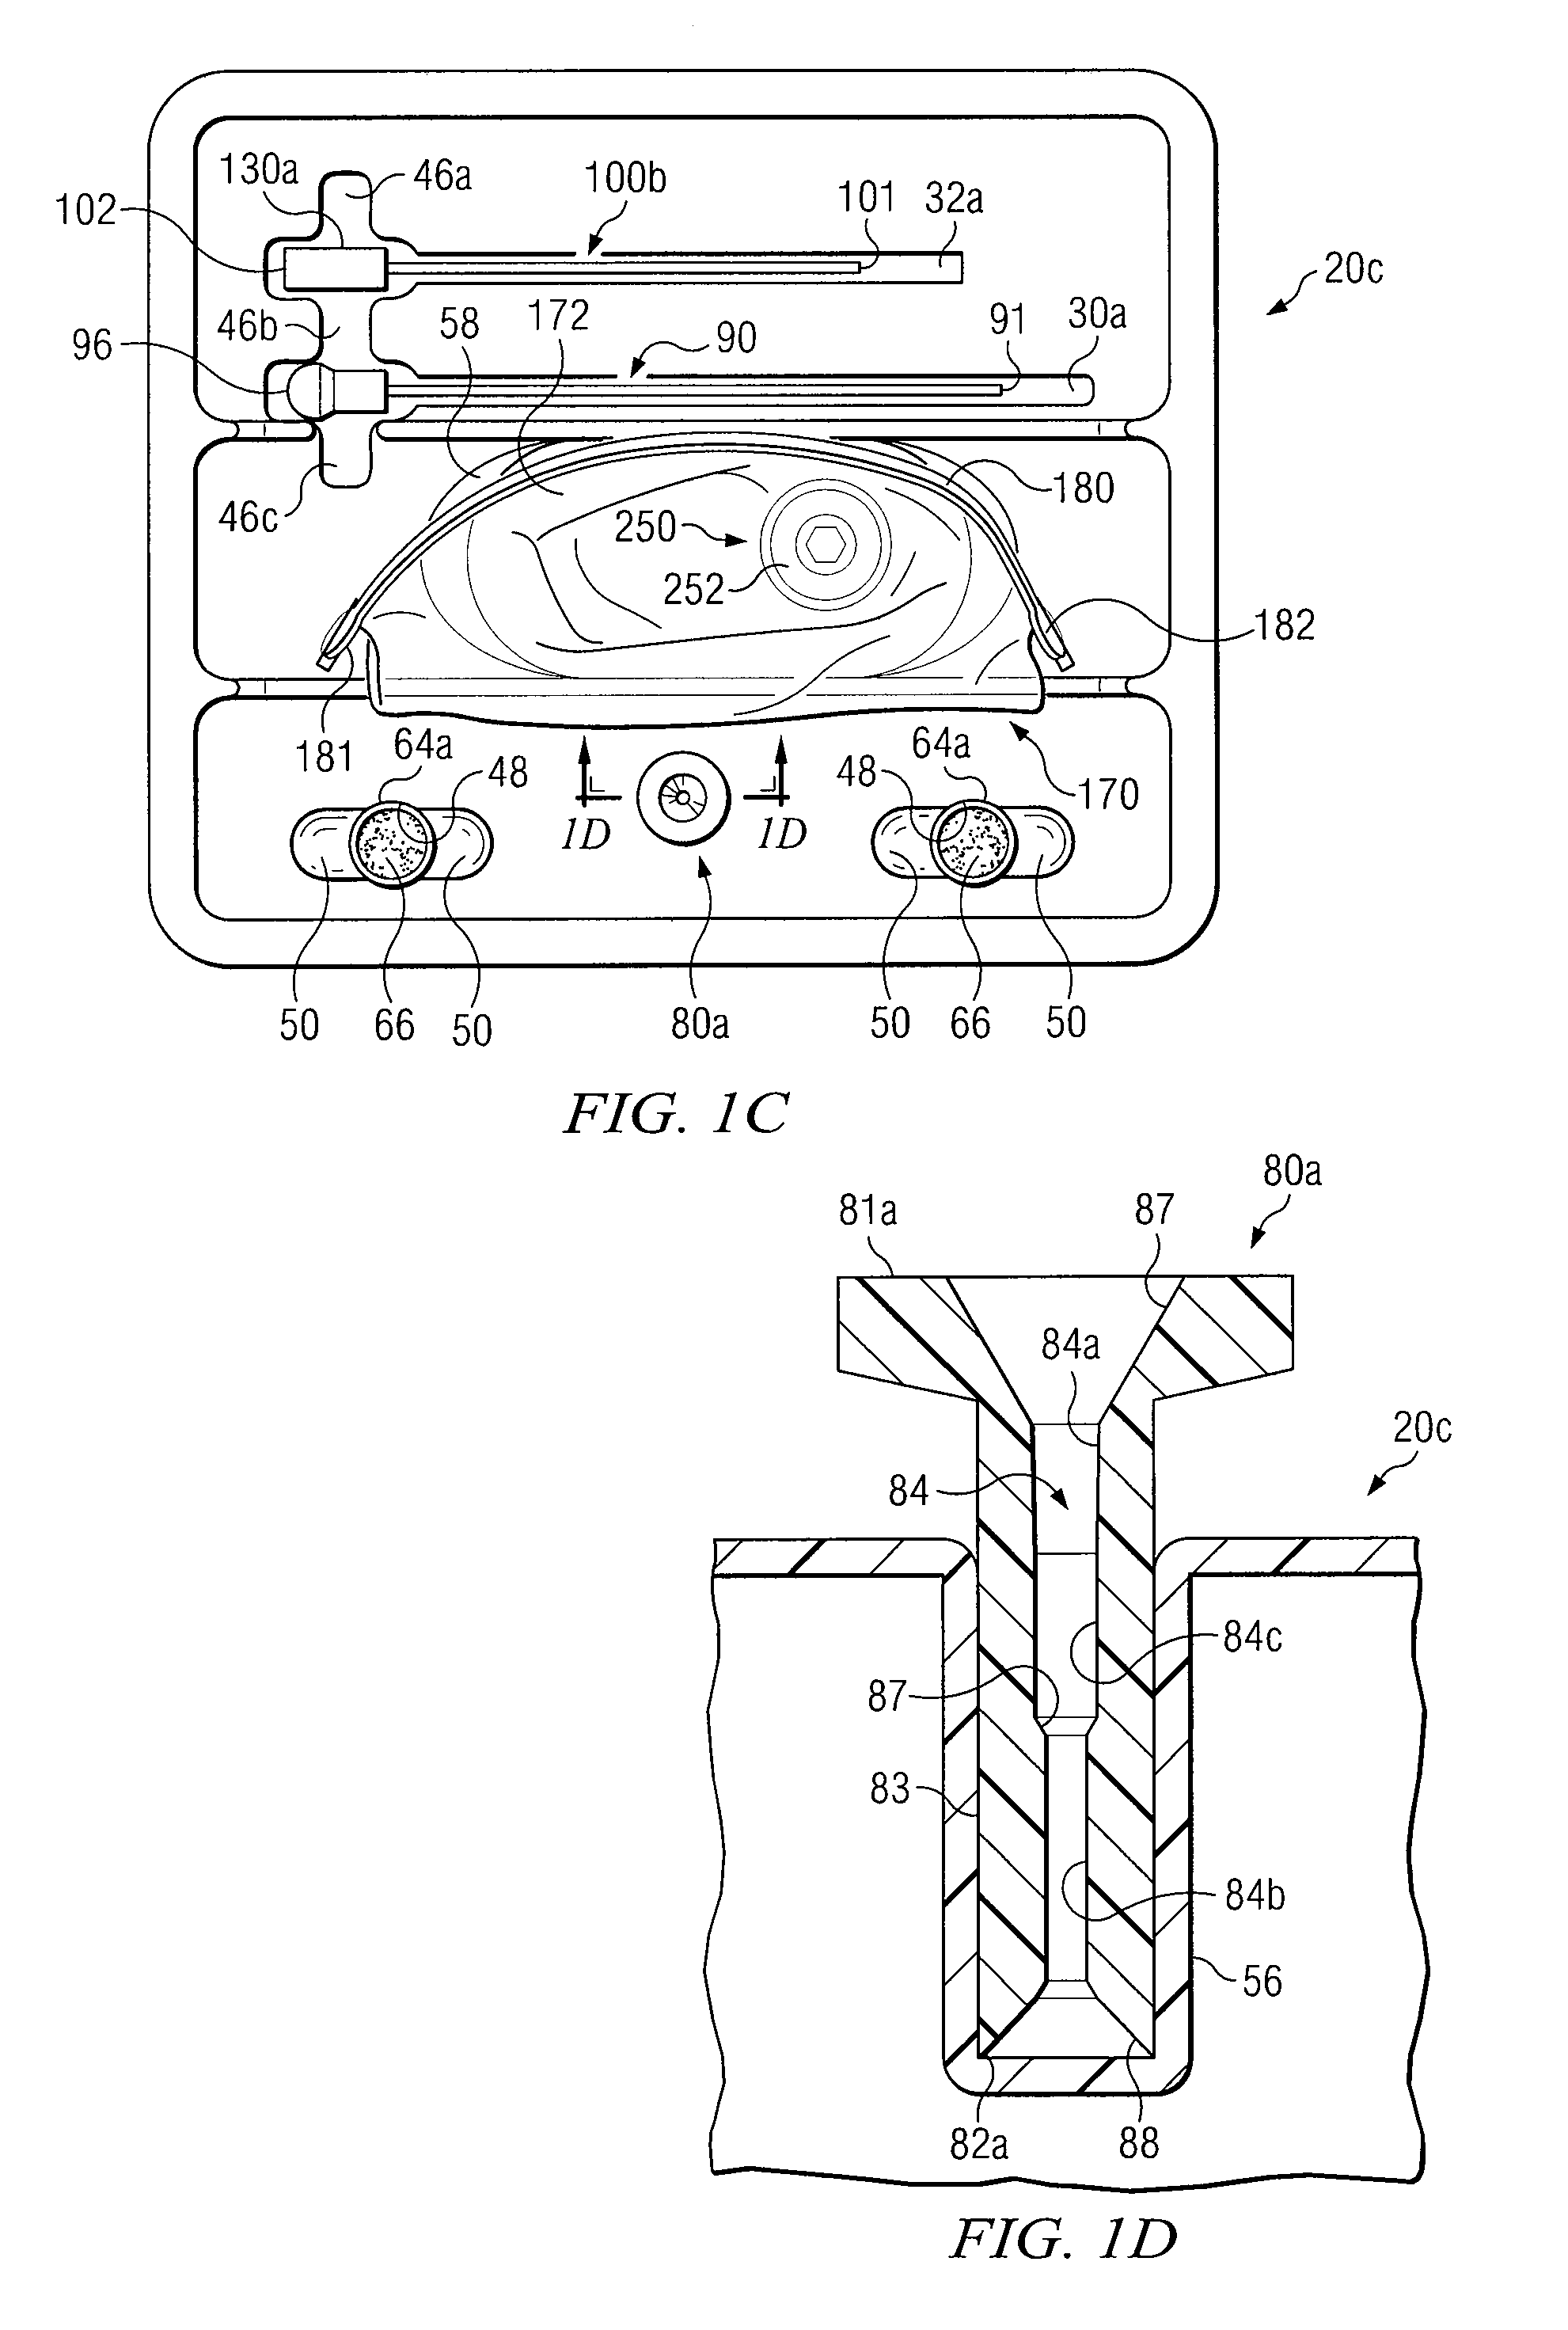 Bone marrow aspiration devices and related methods